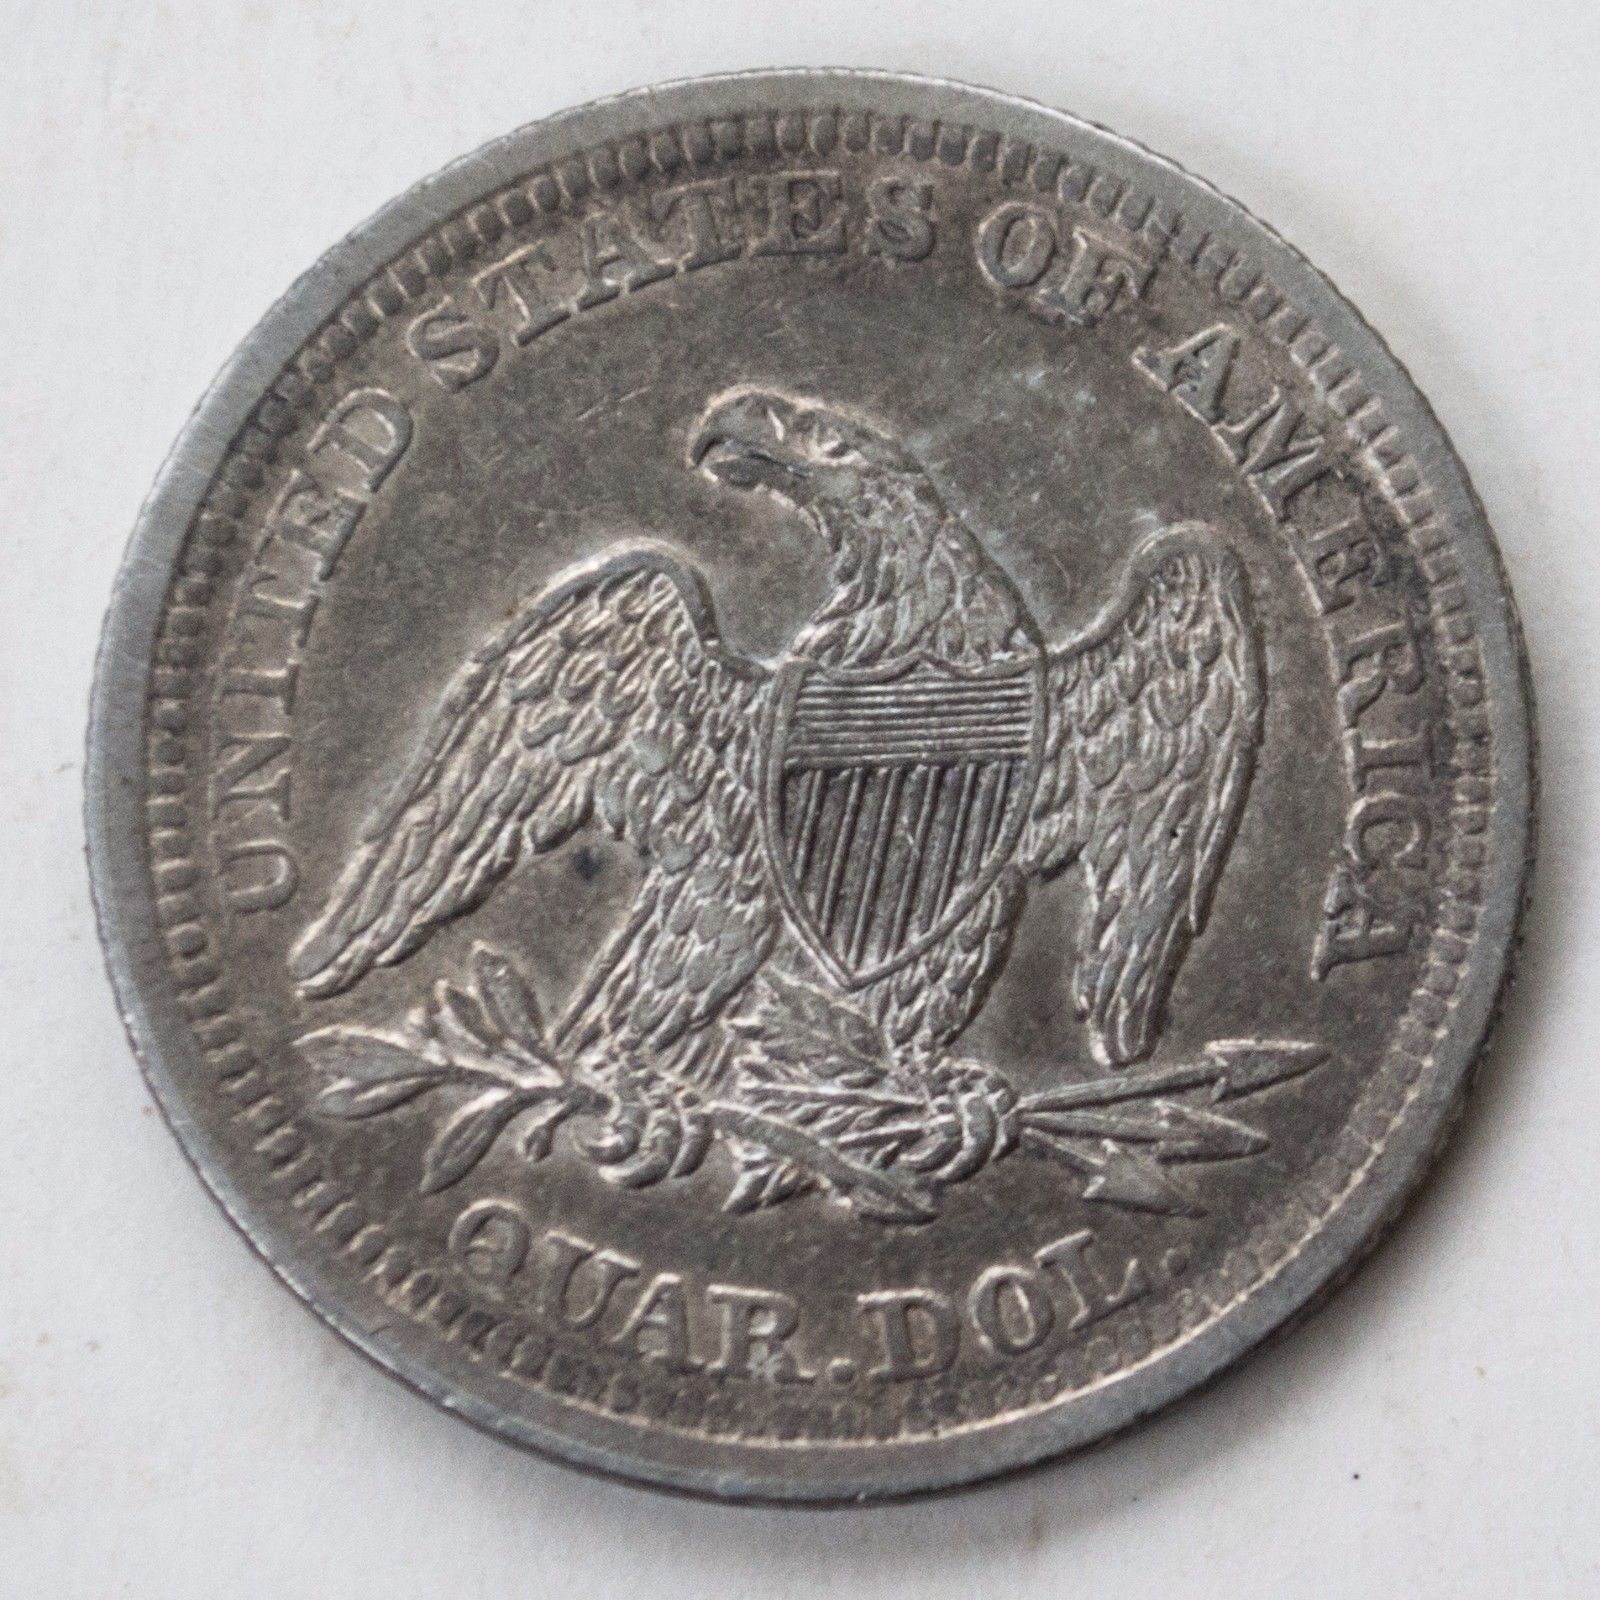 1857 Seated Liberty Quarter AU50 | Of Coins & Crystals